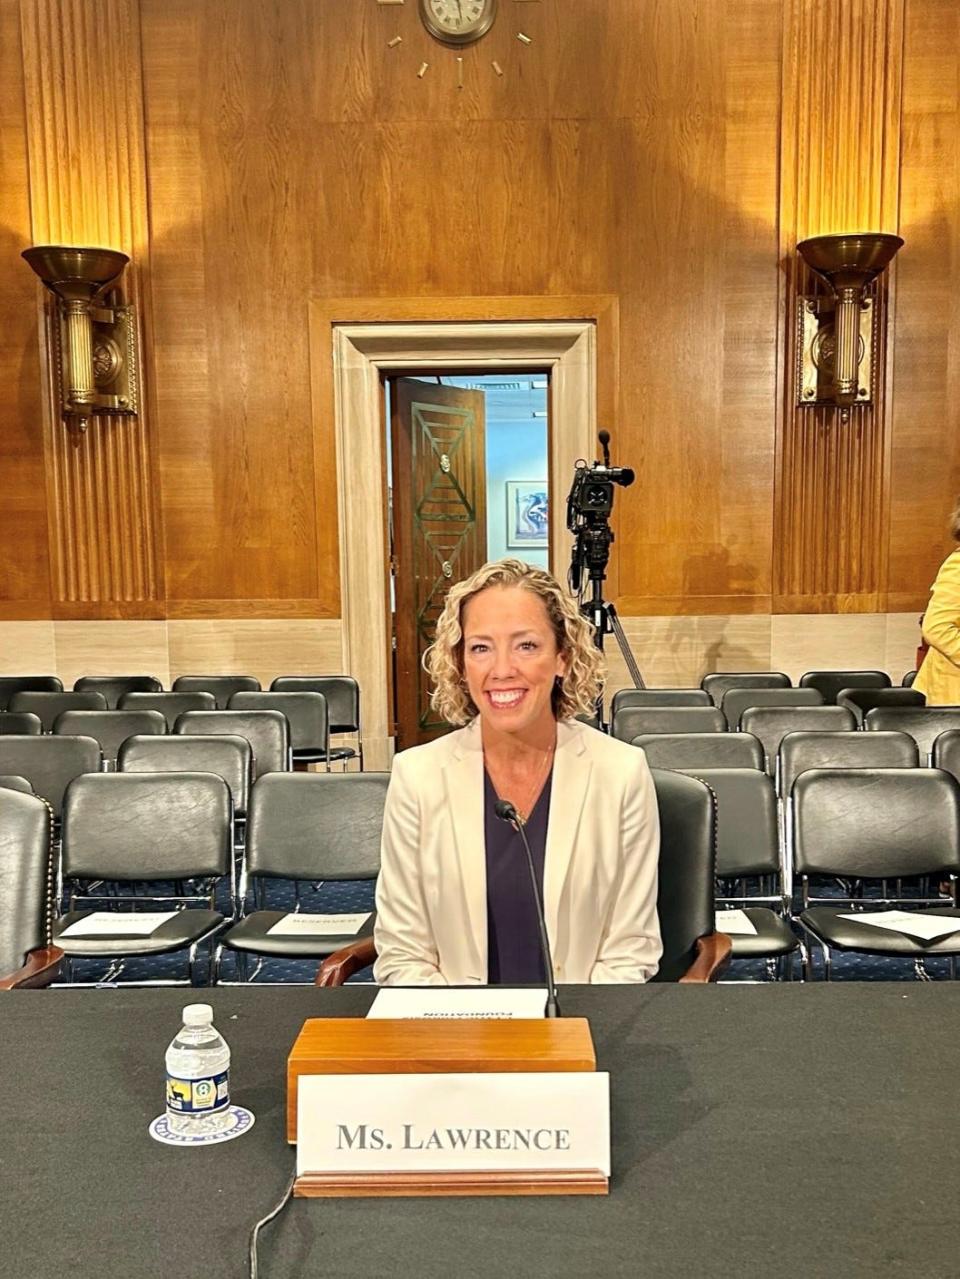 Cystic fibrosis patient Melanie Lawrence, who testified before Congress recently in support of the PASTEUR Act, hoping for more attention and funding to combat antibiotic resistance.